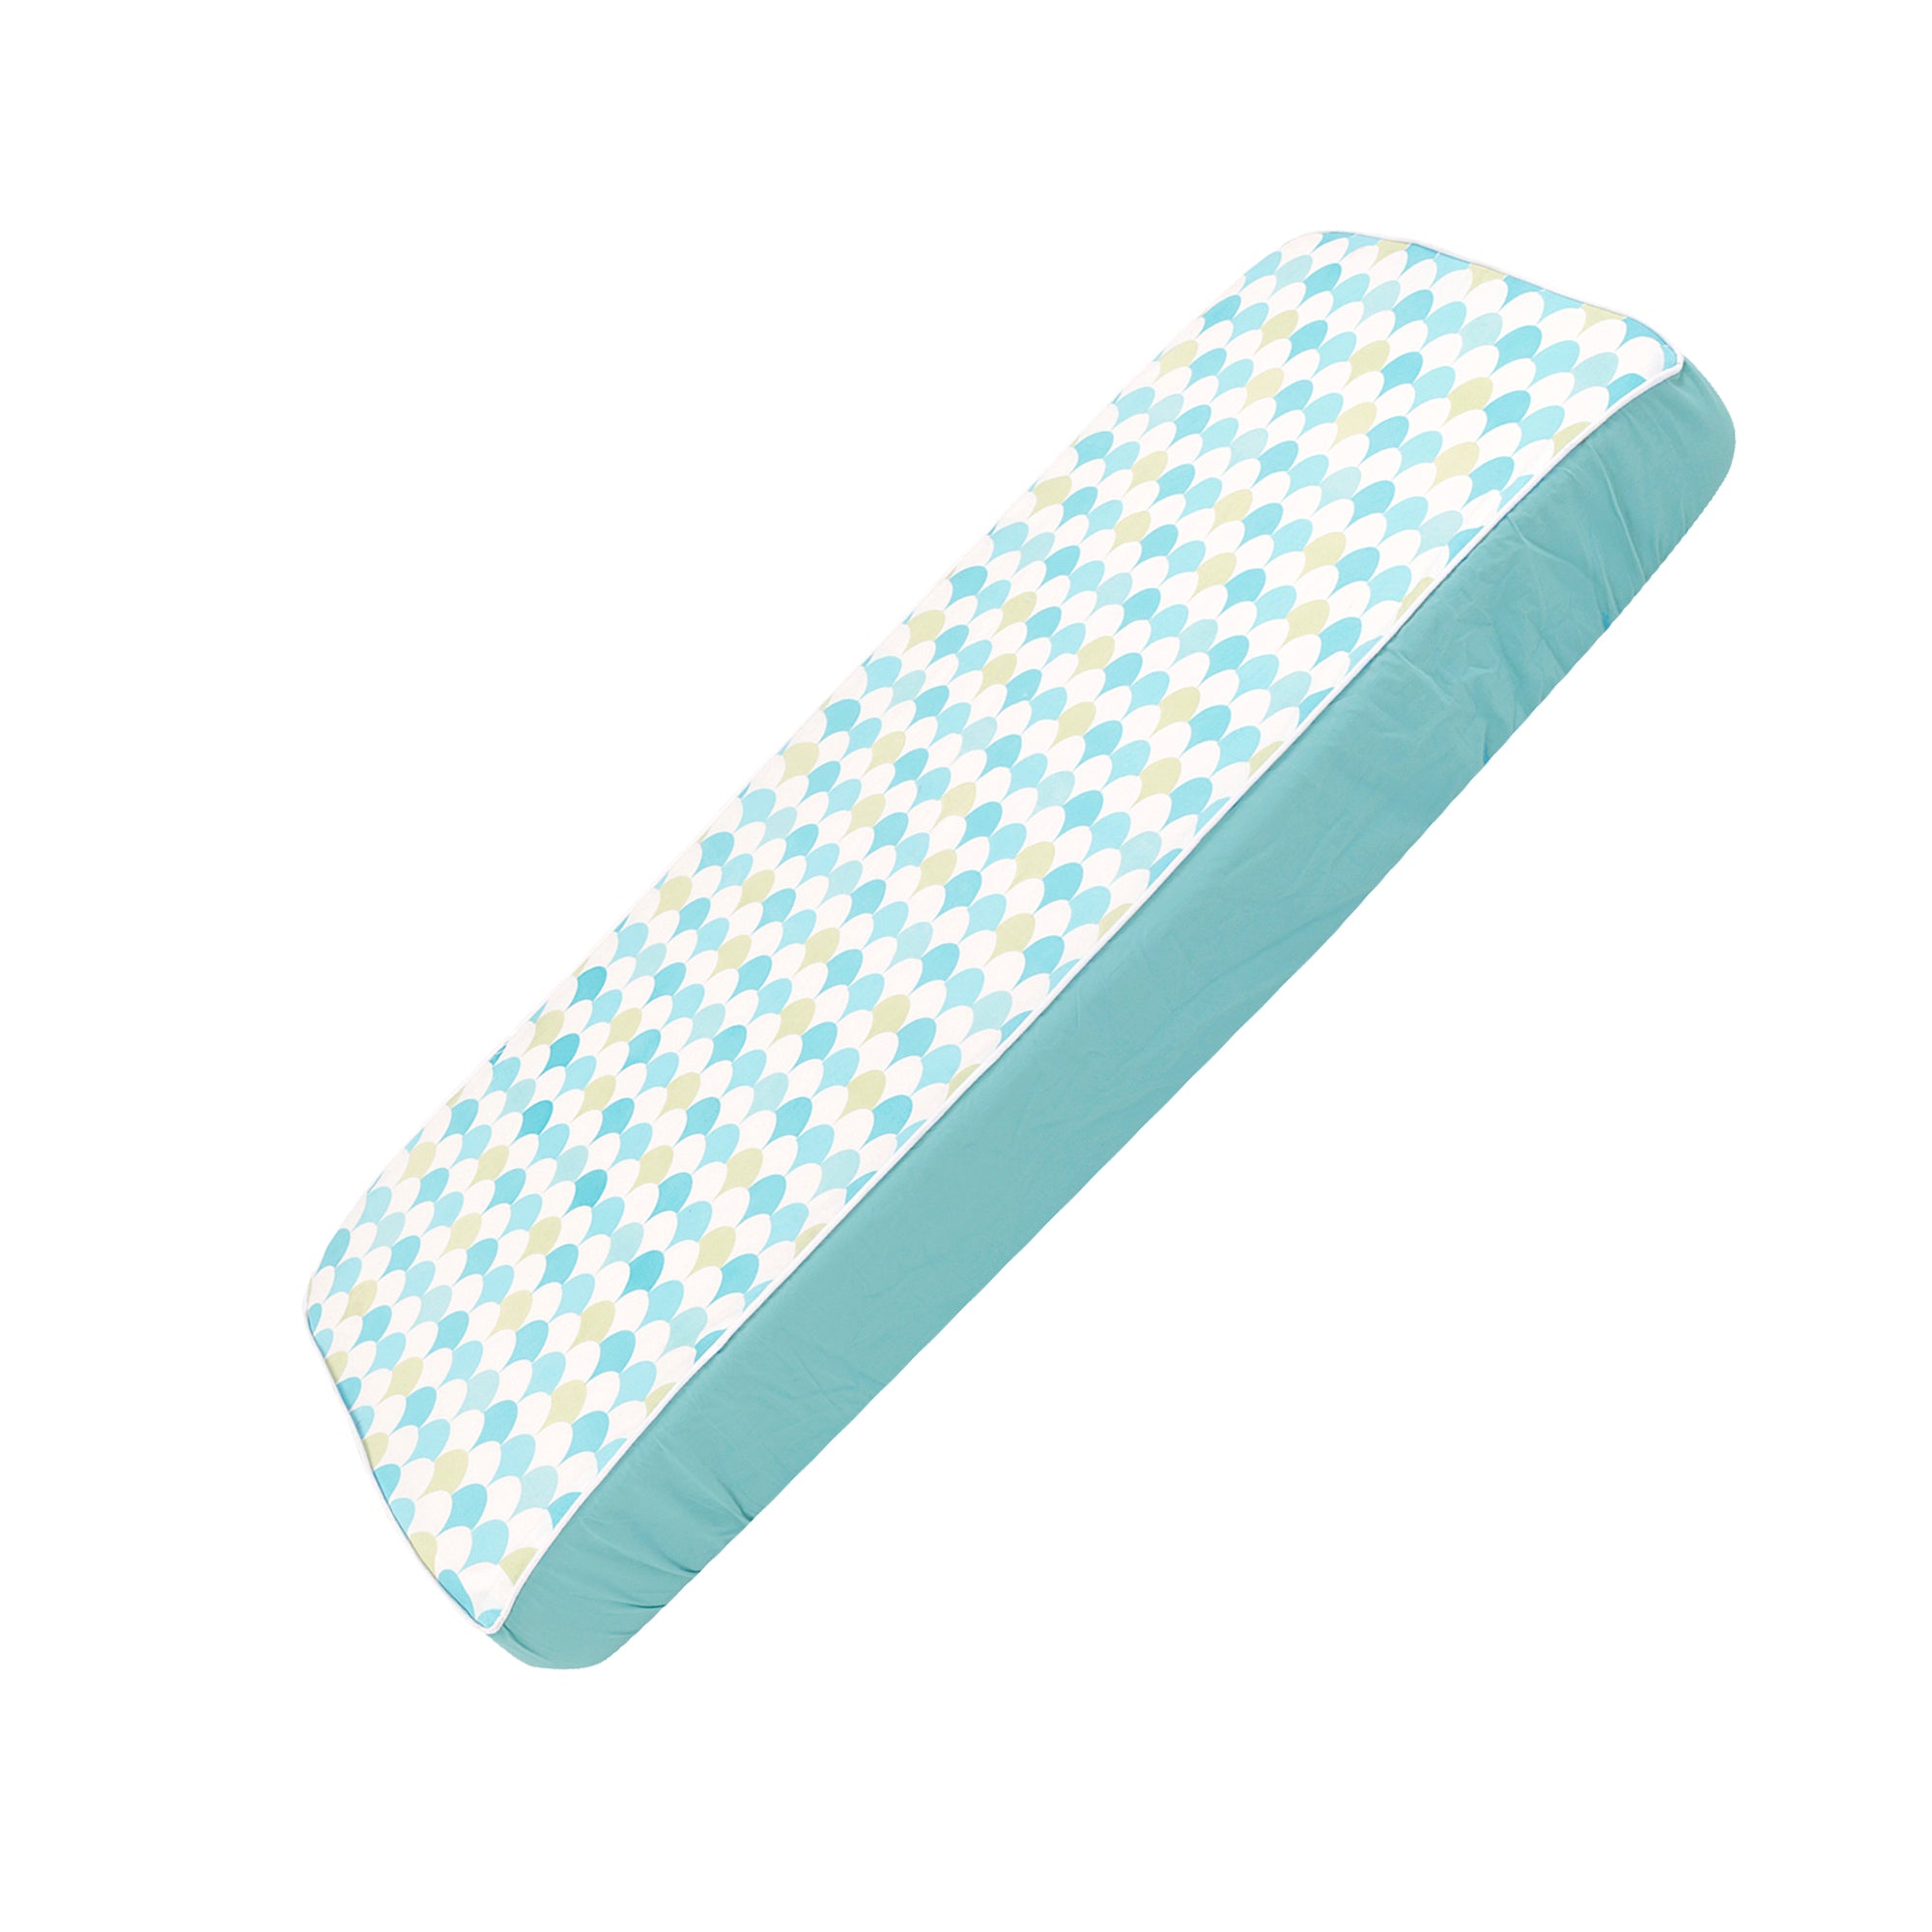 MELLOW GREEN SCALLOP FITTED CRIB SHEET (109 cm x 67cm)